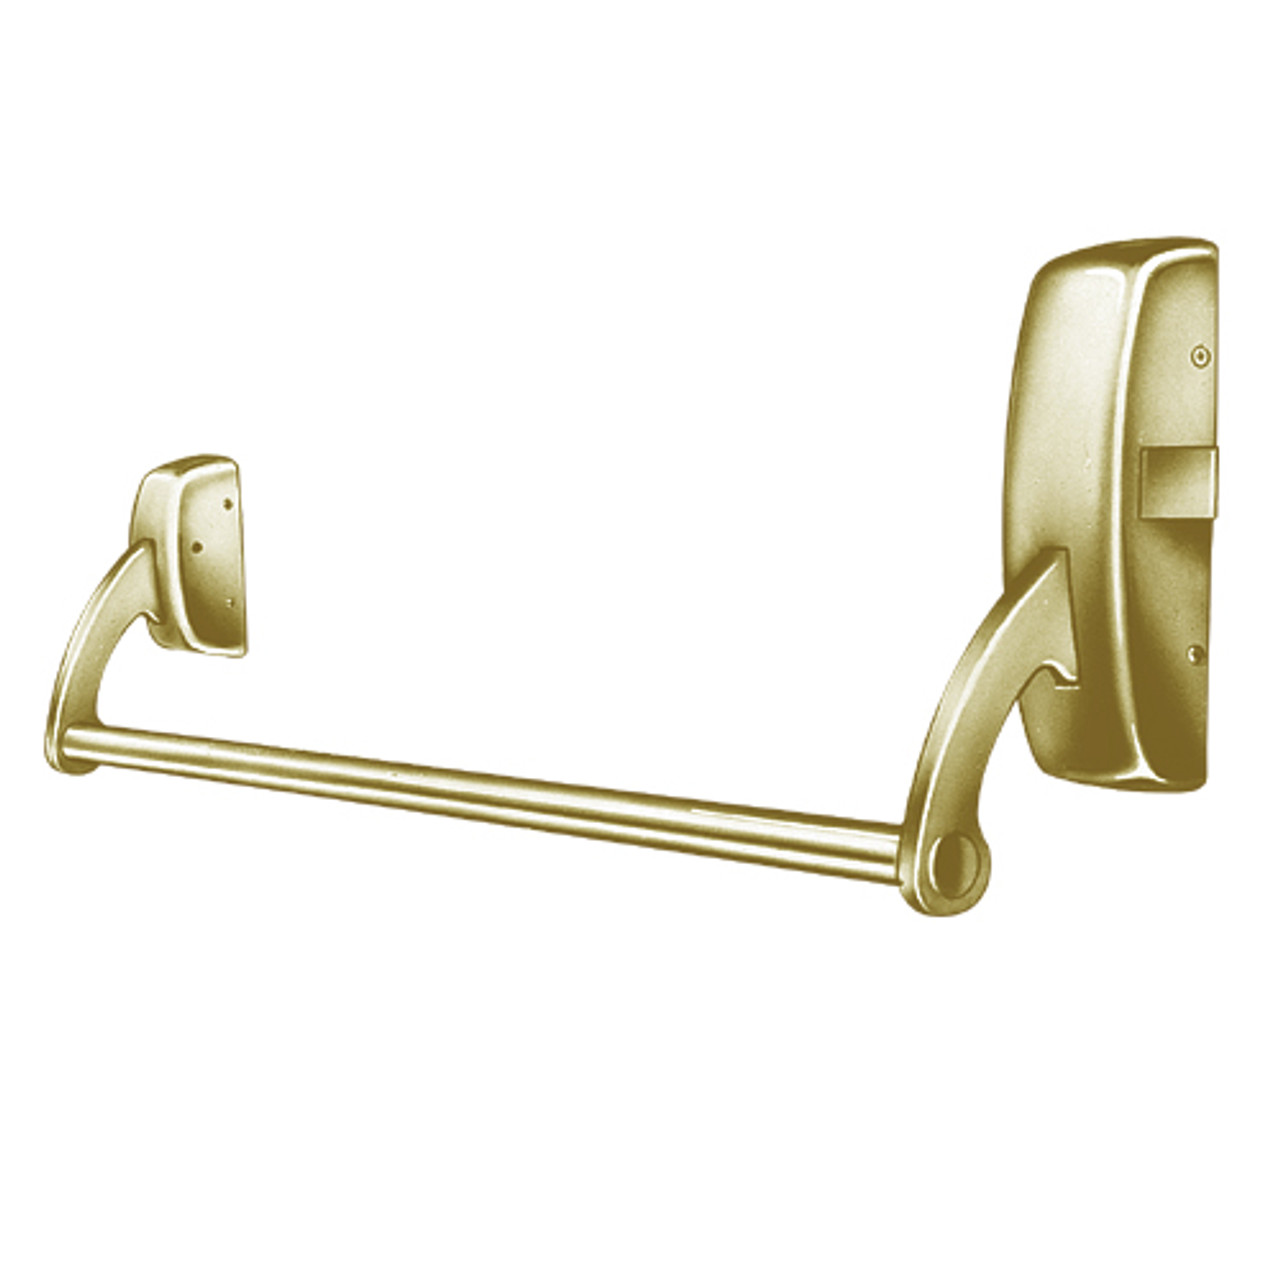 9810-LHR-04 Sargent 90 Series Exit Only Rim Exit Device in Satin Brass